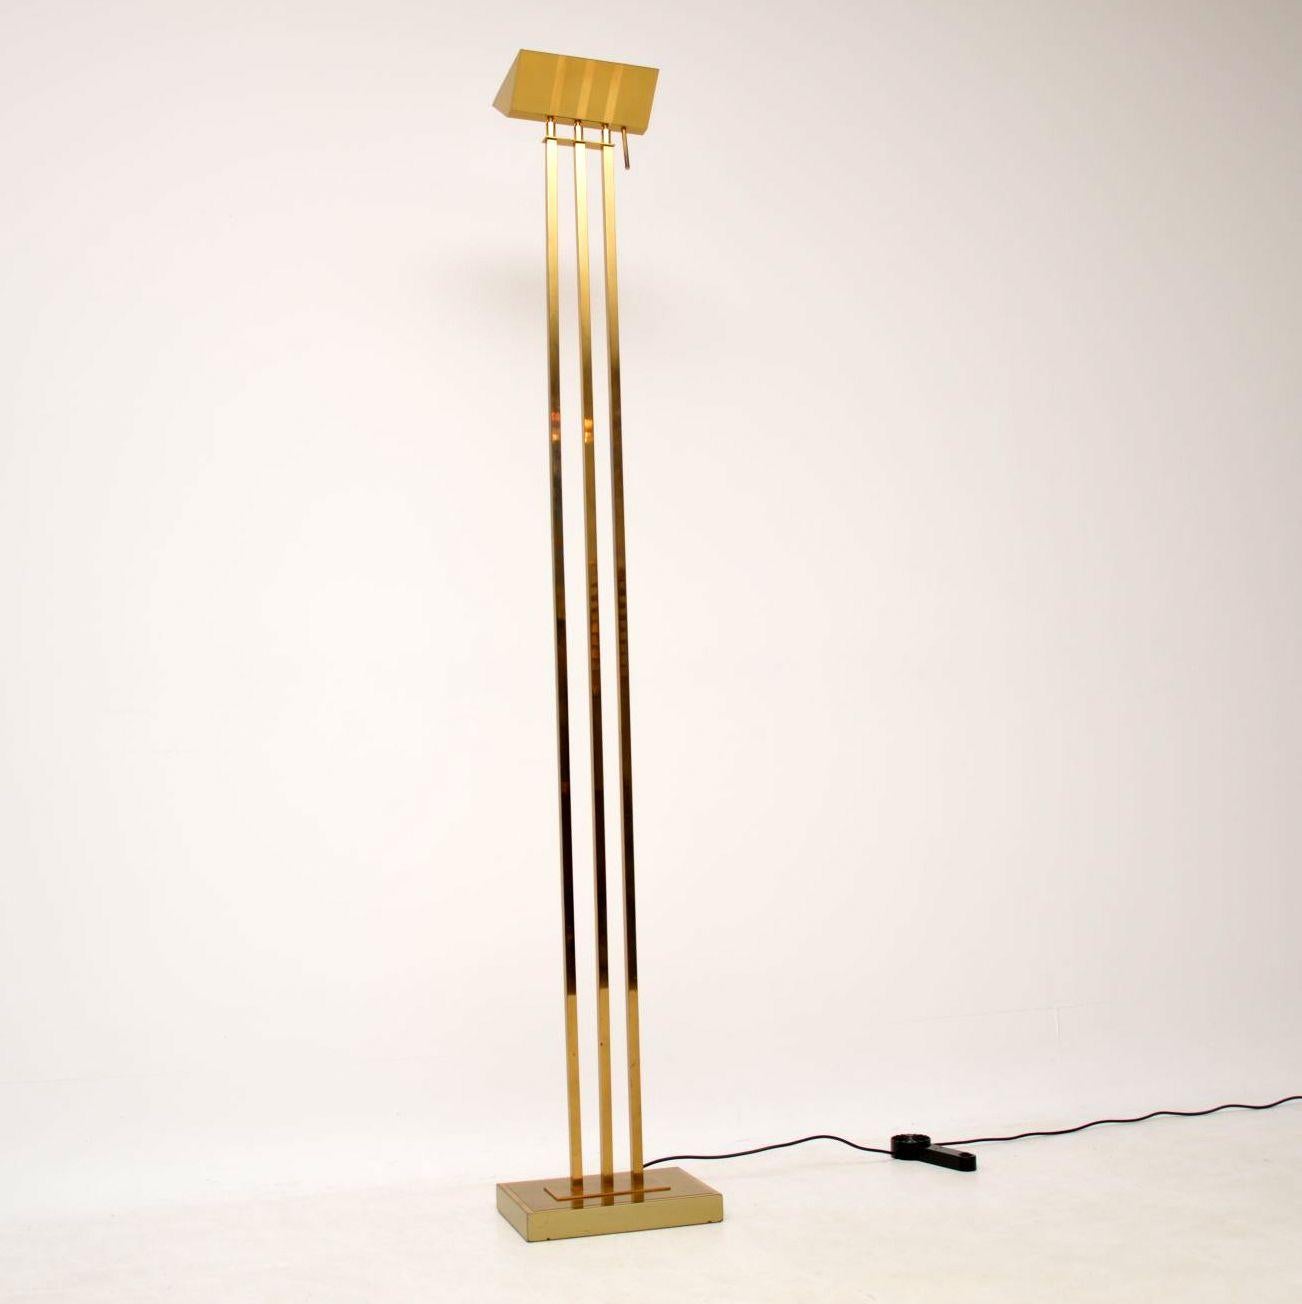 A beautiful and top quality vintage Italian brass floor lamp, this dates from the 1970s and is in great condition, there is just some extremely minor surface wear. It’s in good working order with a dimmer switch, the head is adjustable between an